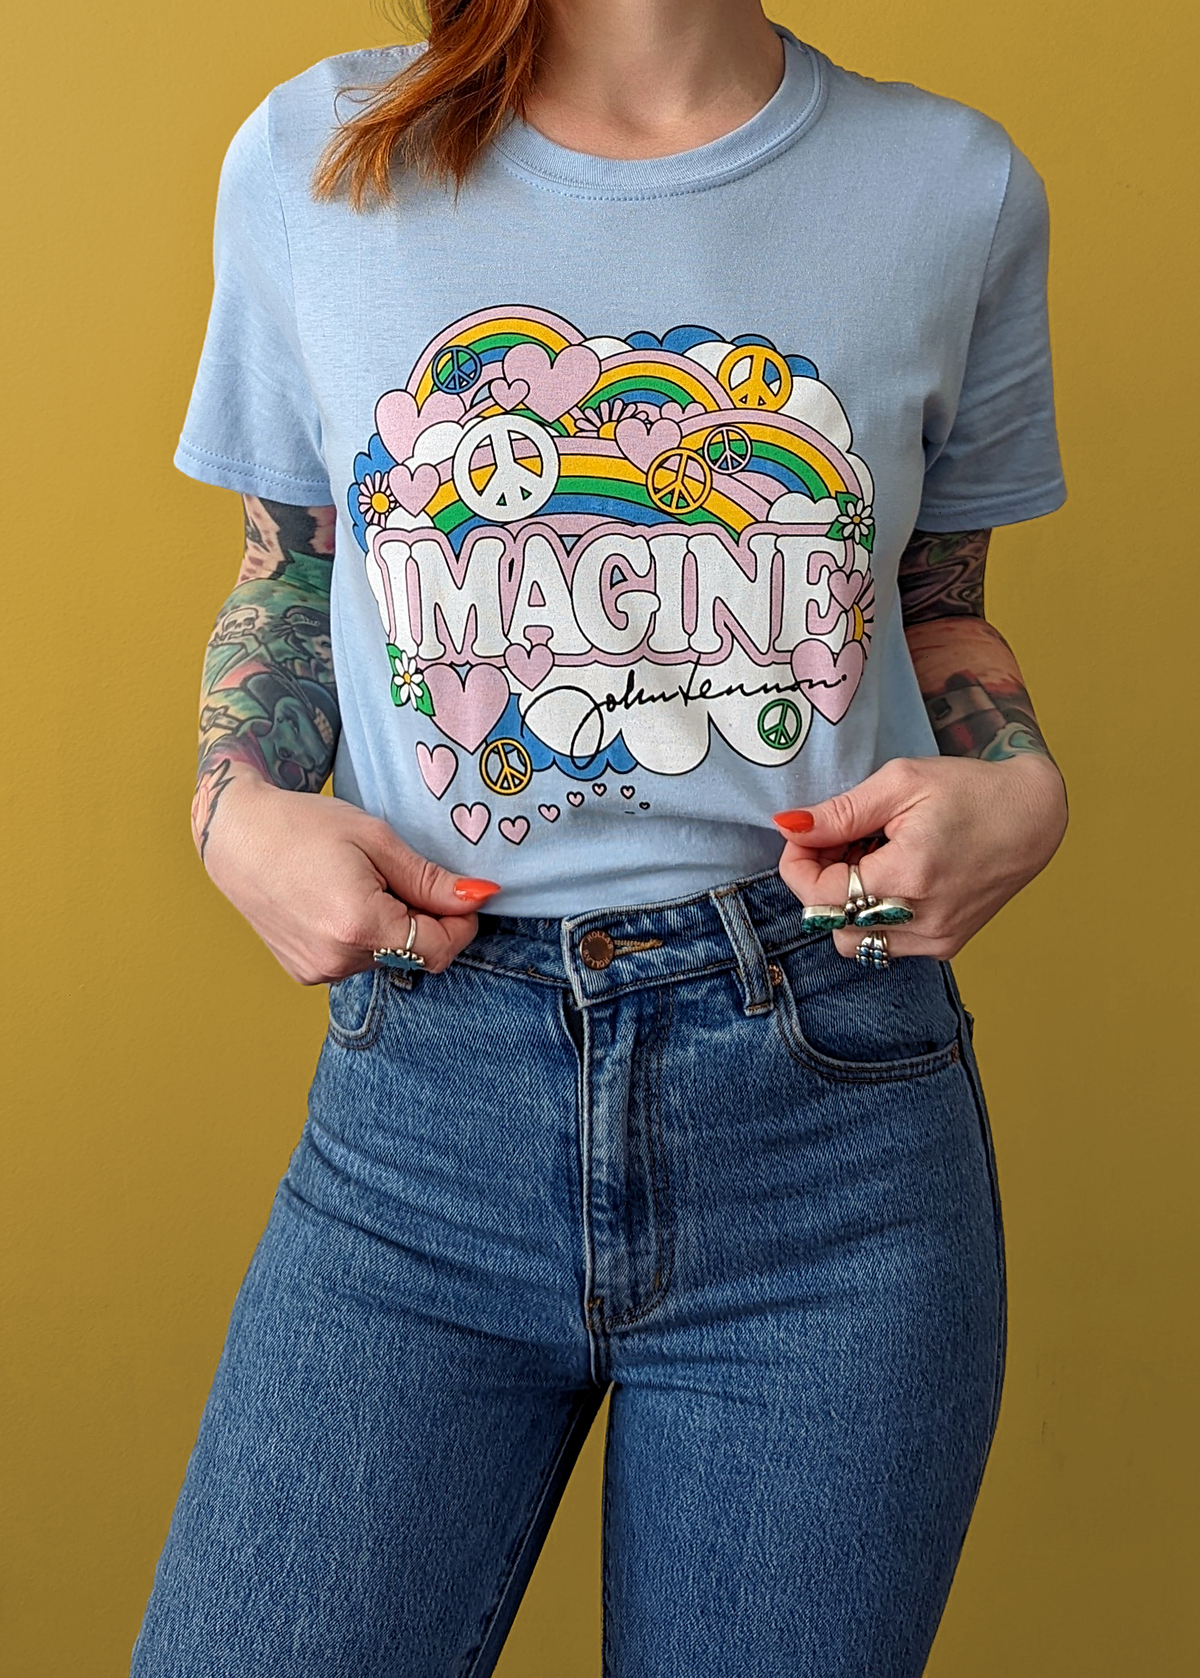 Psychedelic John Lennon Imagine baby blue tee with peace signs, clouds, and rainbows by Daisy Street